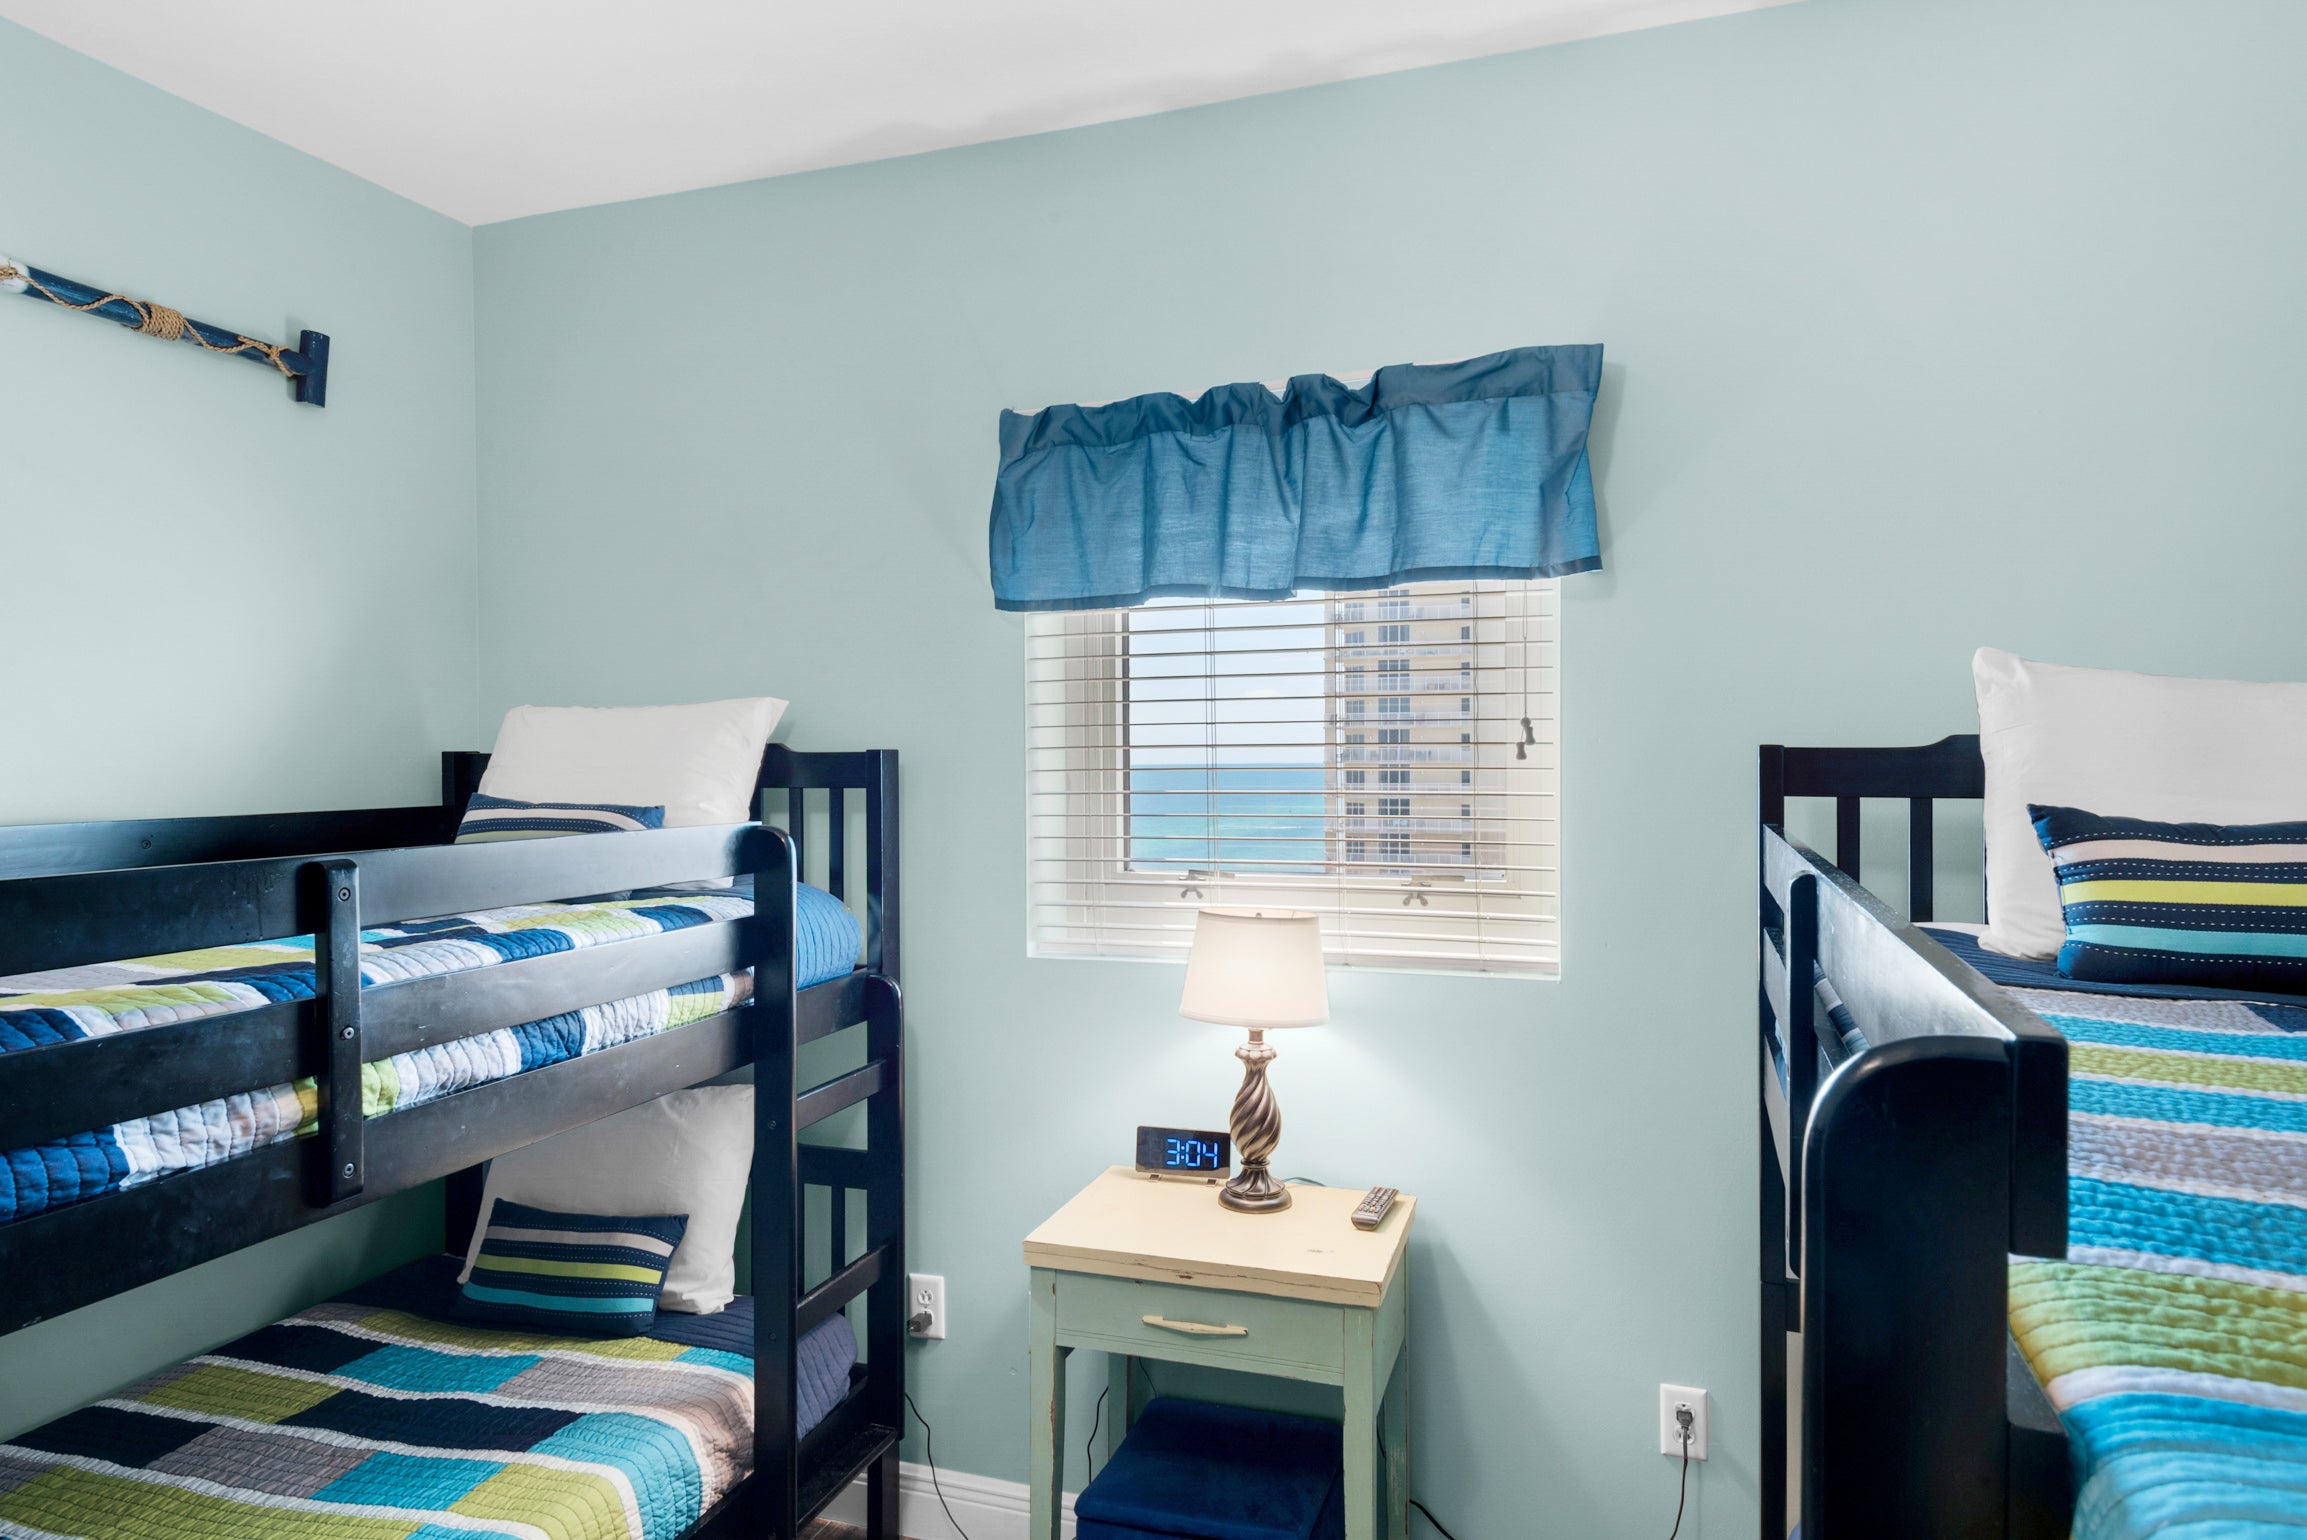 Bunk room with 2 sets of bunk beds